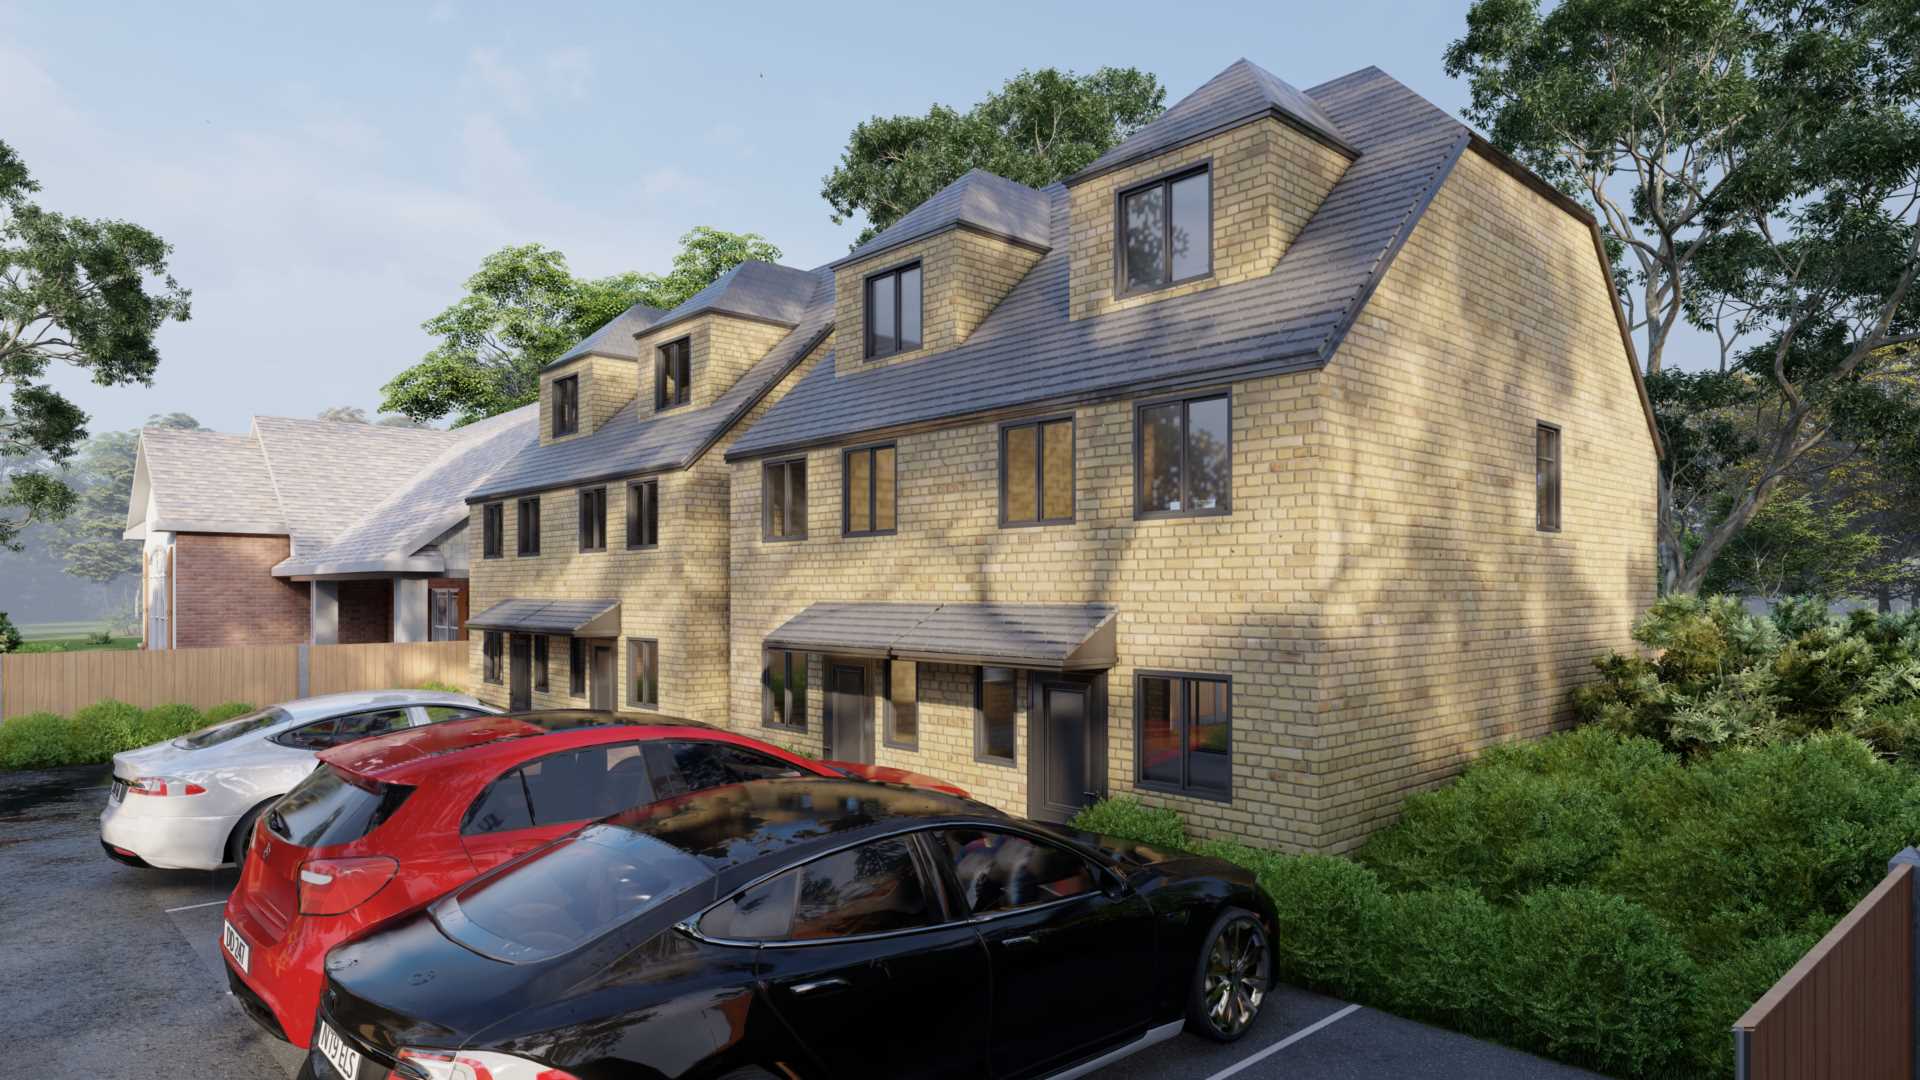 PLOT 1  **  BRAND NEW AND COMING SOON - OFF PLAN RESERVATIONS BEING TAKEN  **  HIGH STREET GREEN, HH, Image 1